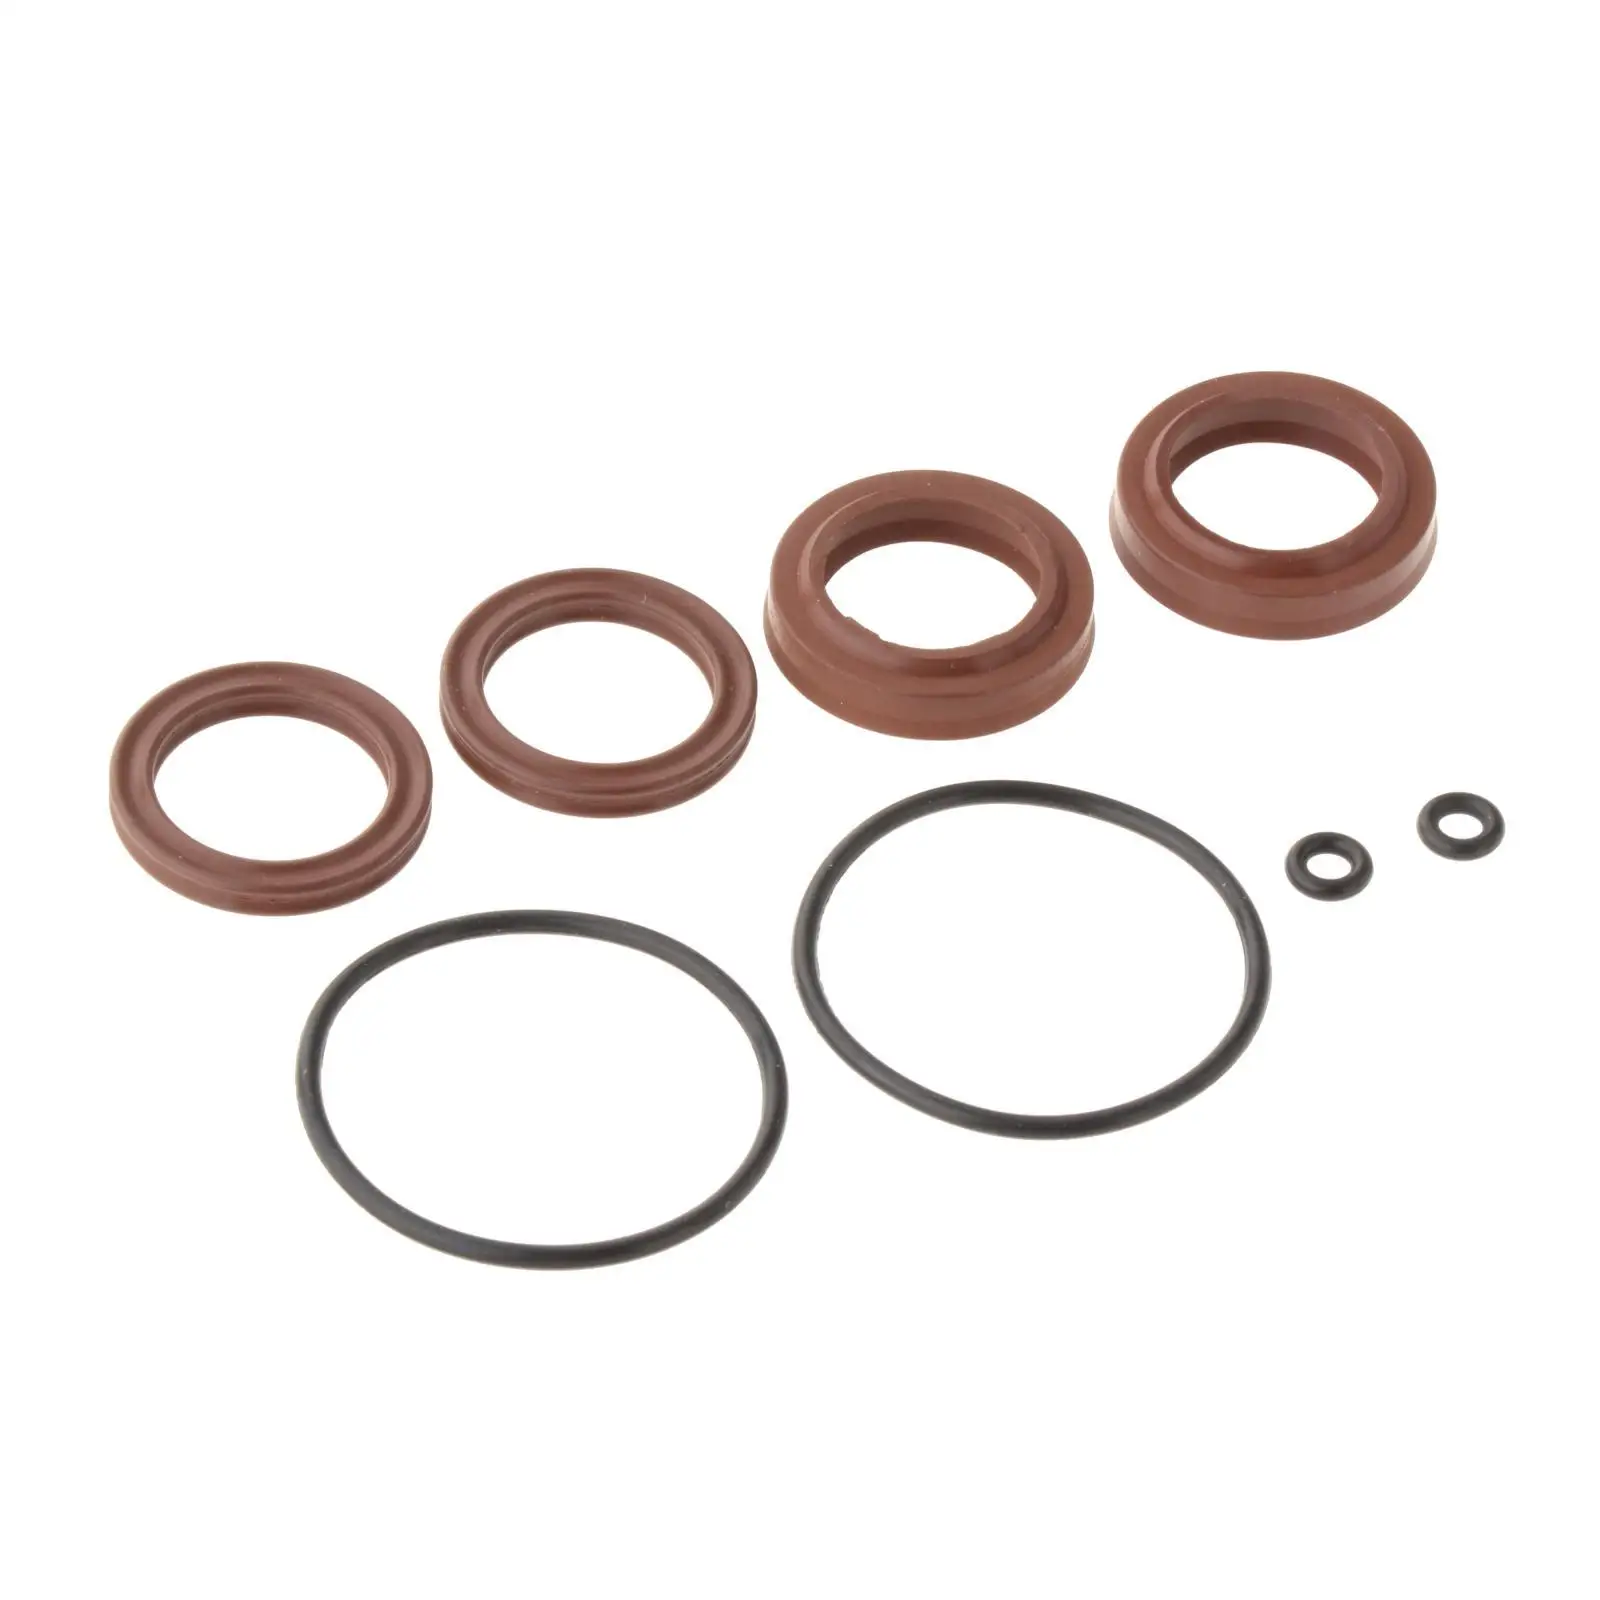 

8Pcs Steering Cylinder Fit for Seastar Rubber Replacement Kit Rings HC5345 Fsm051 Professional Seal Kit Front Mount